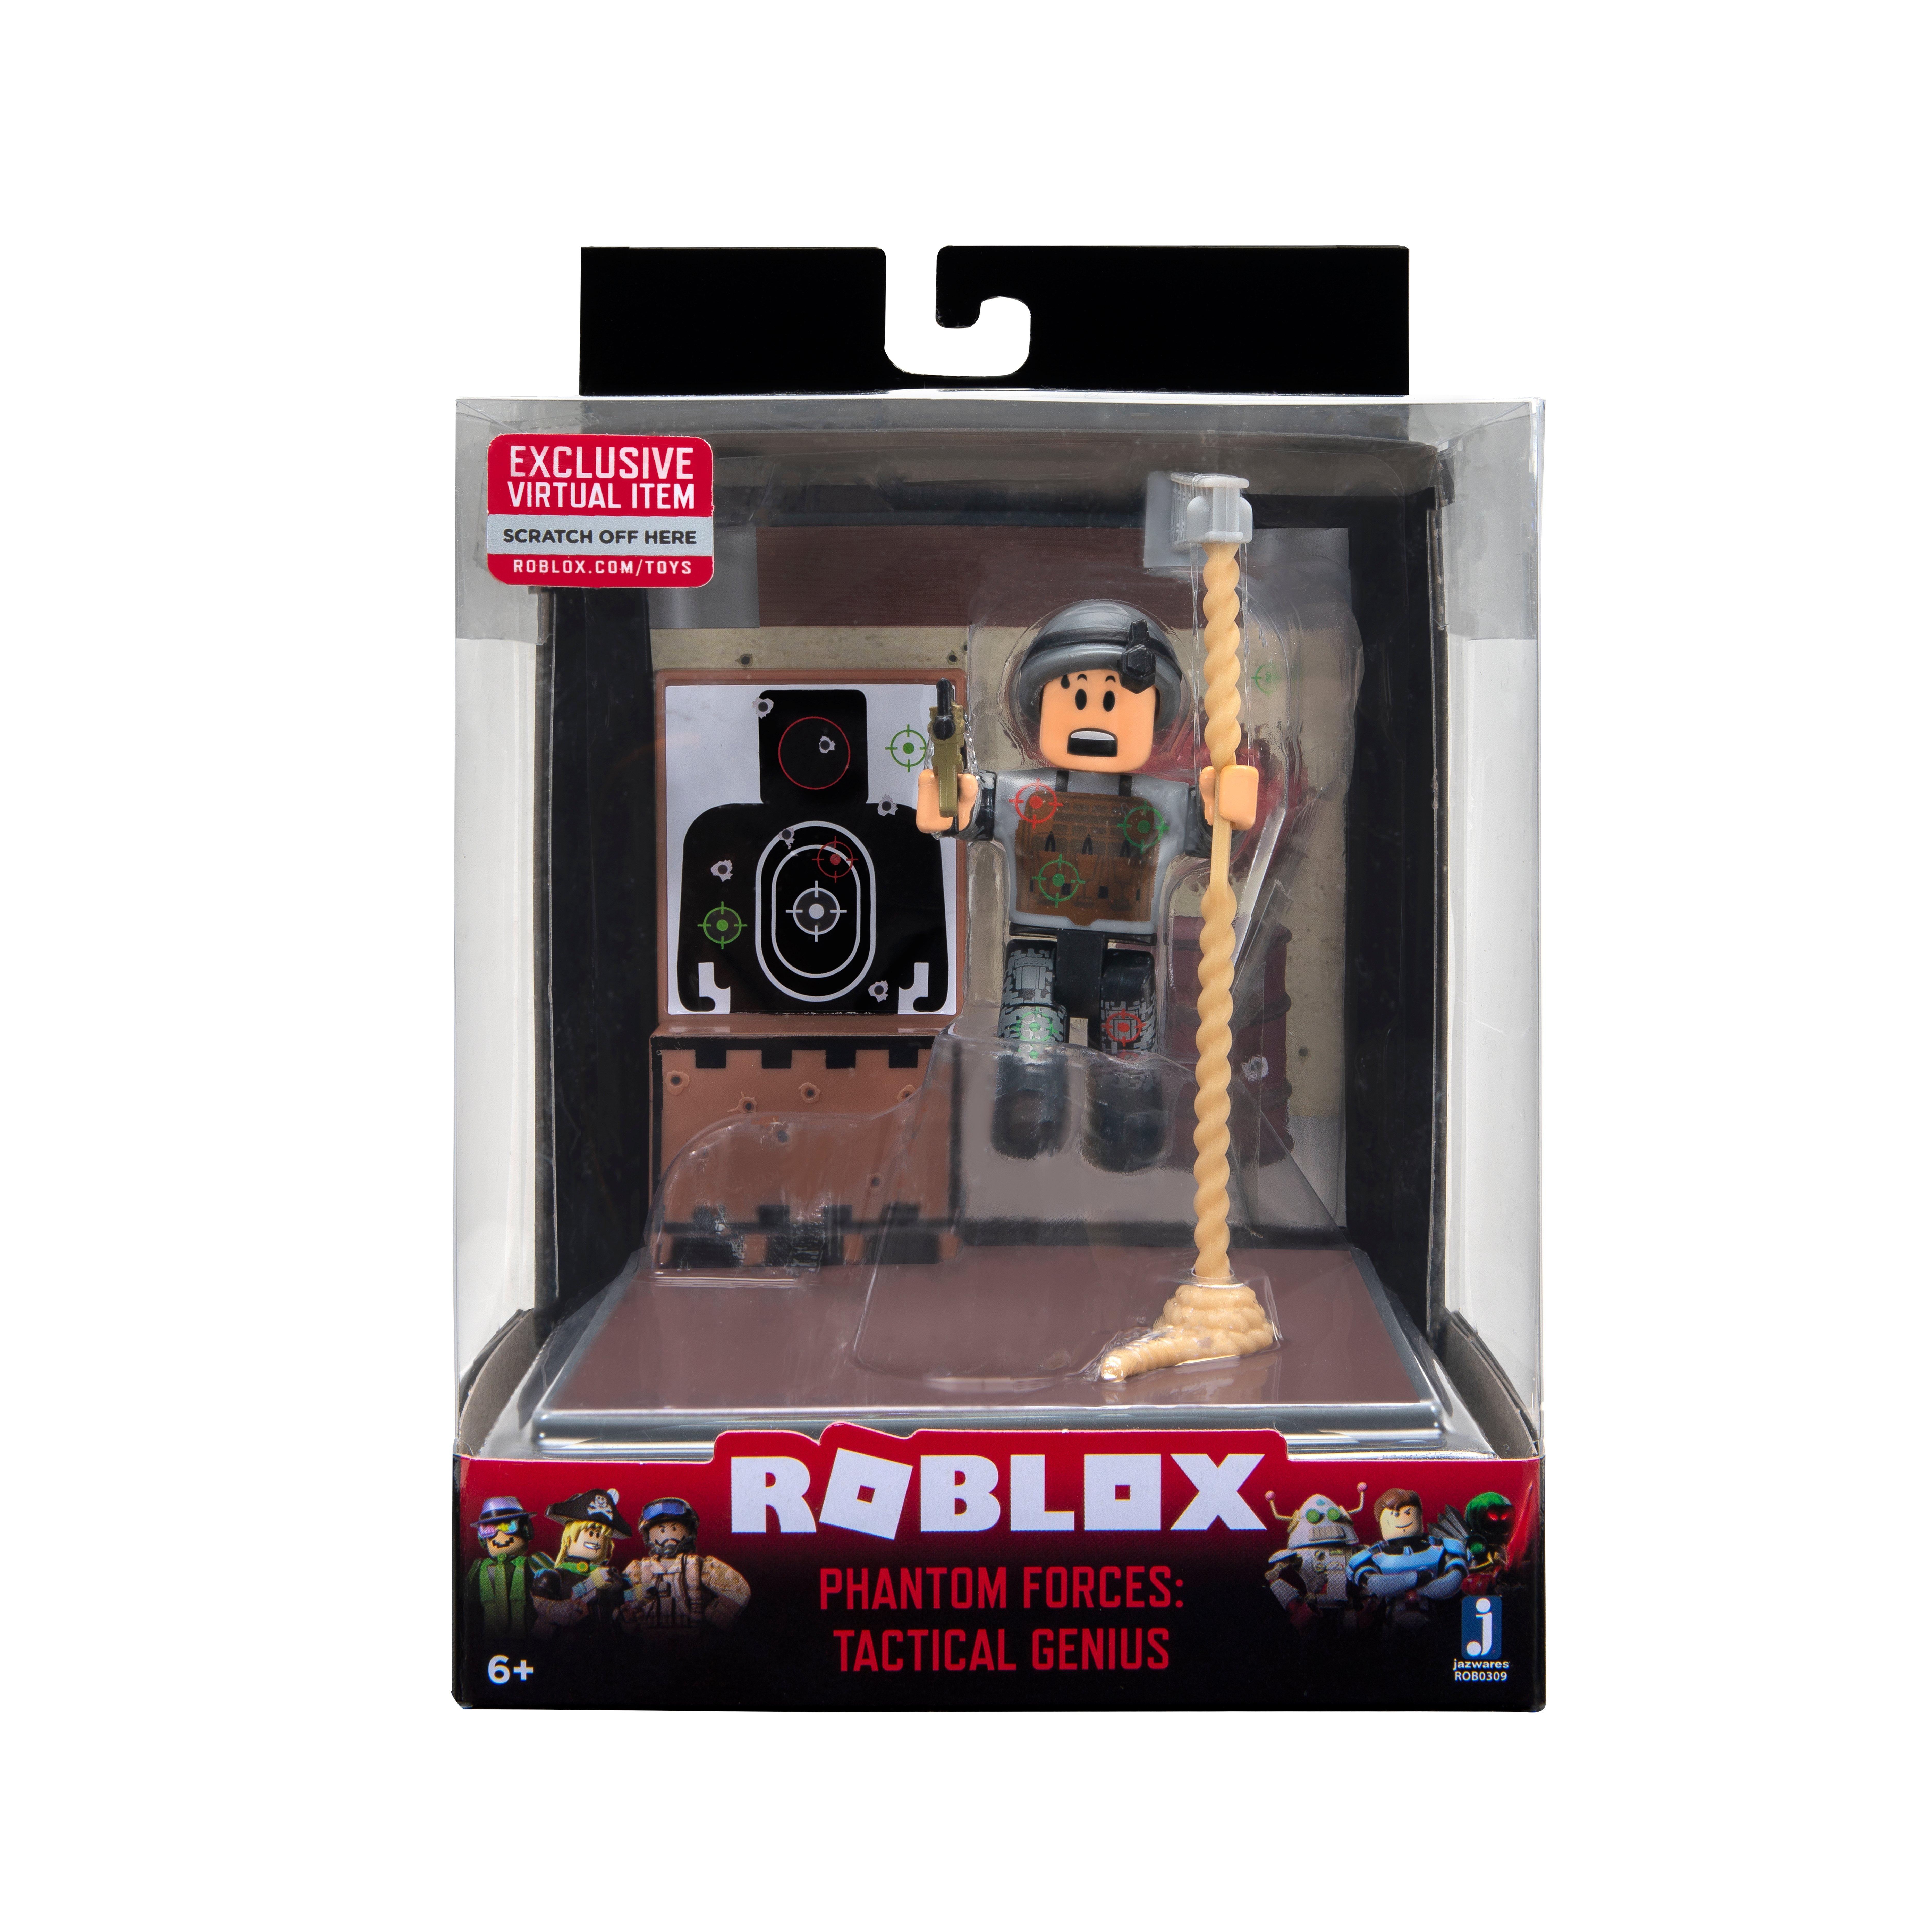 Roblox Desktop Series Collection Styles May Vary Includes 1 Exclusive Virtual Item Gamestop - roblox phantom forces esports